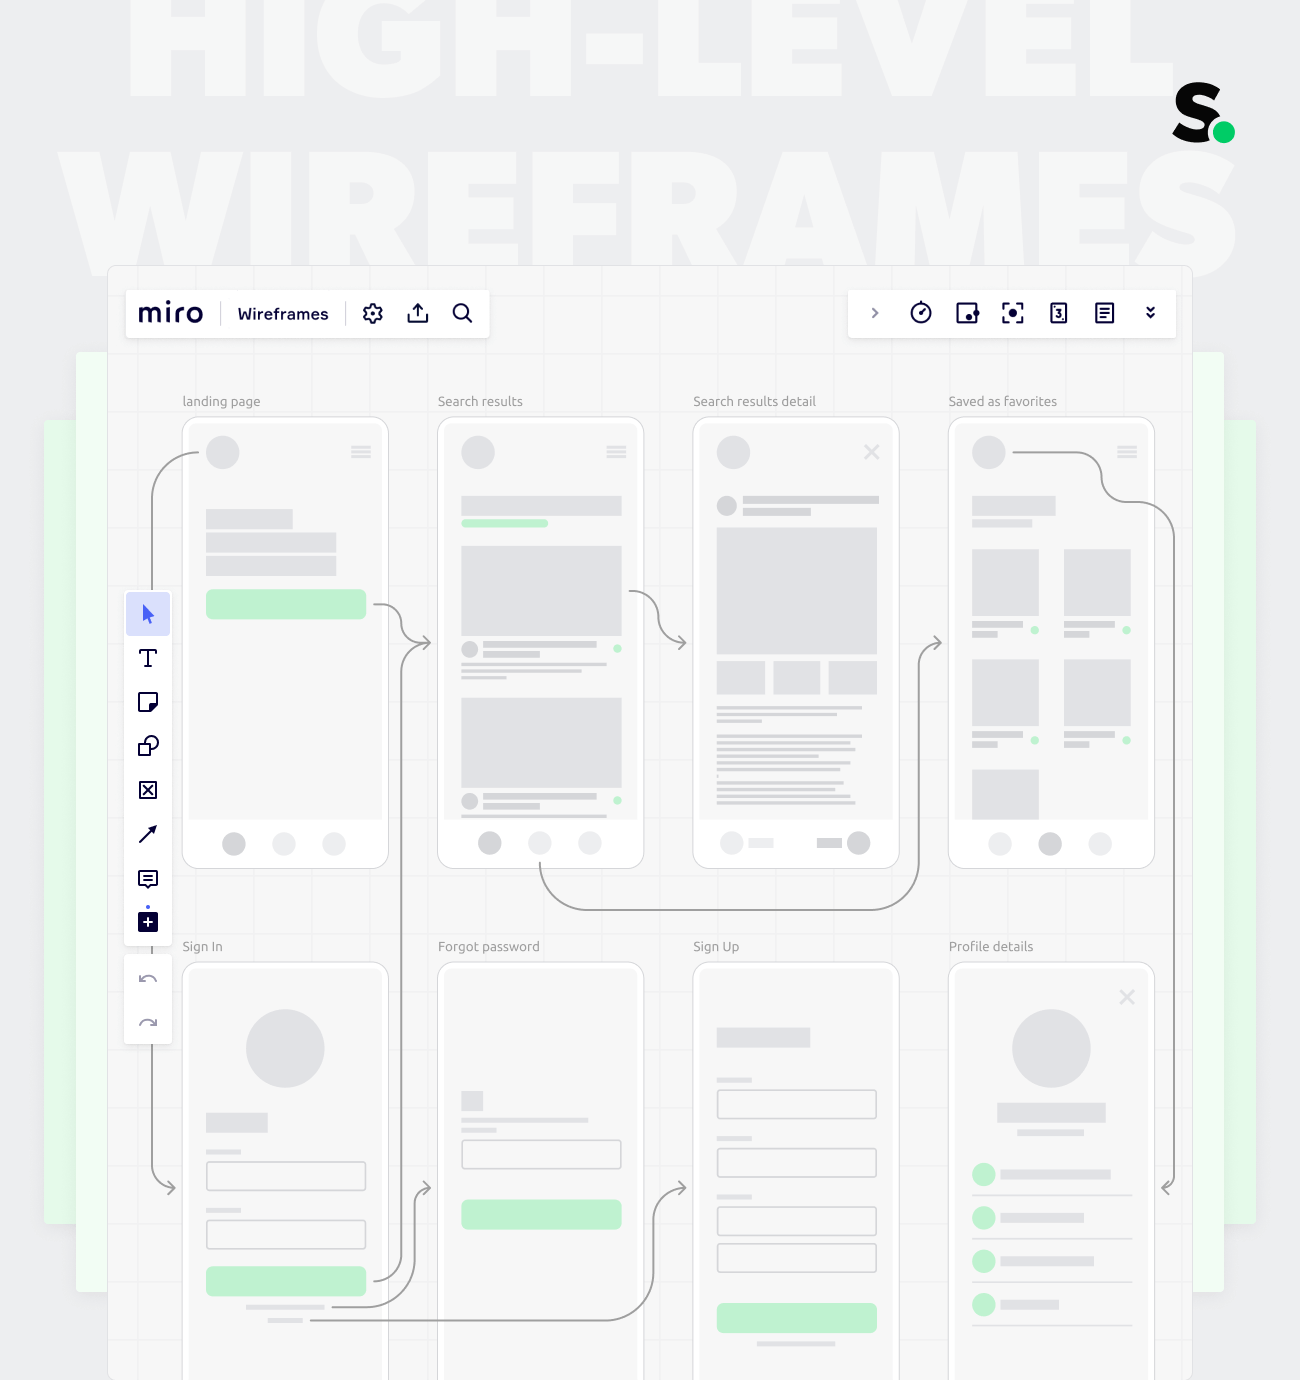 Example of high-level wireframe ui deliverable